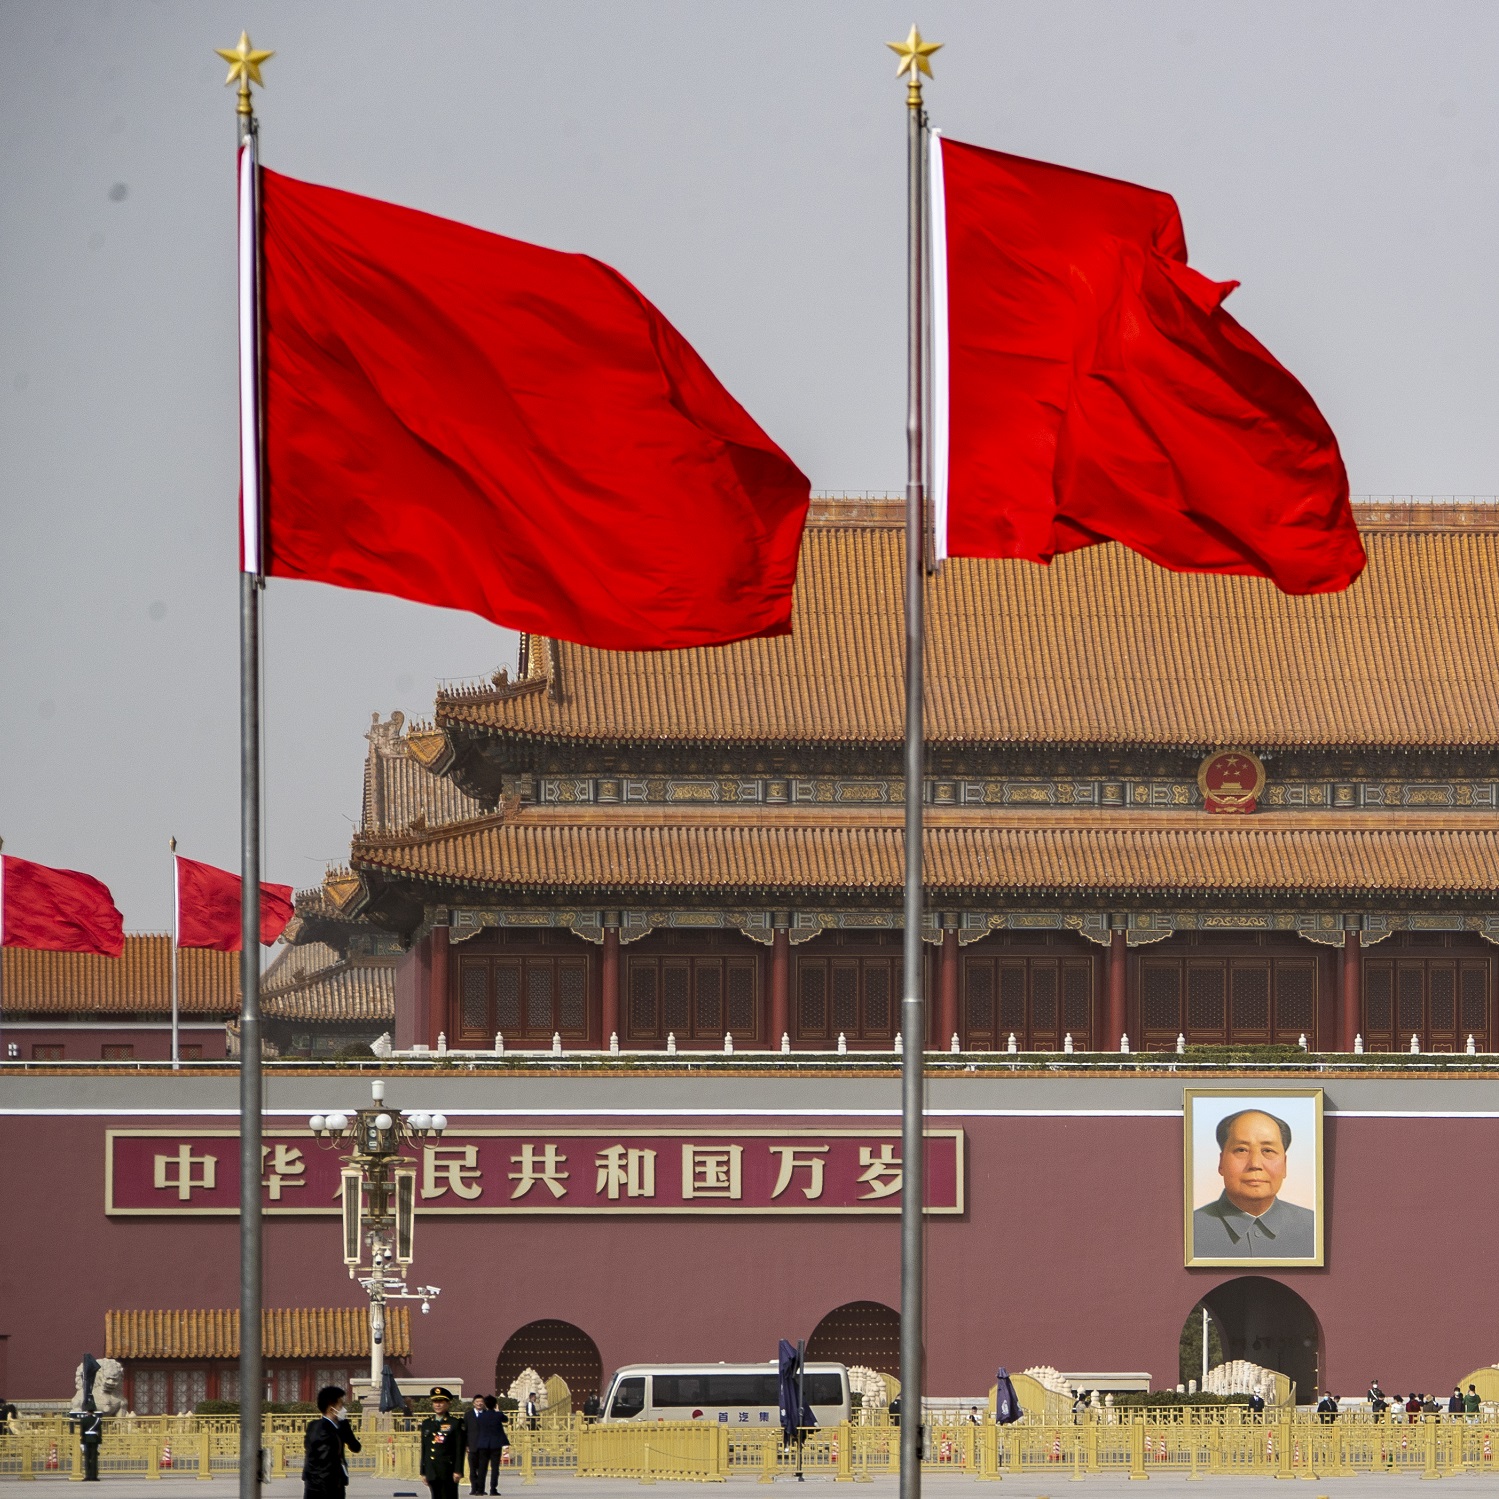 Chinese national flags flutter at Tian'anmen Square in Beijing during the annual sessions of the National People's Congress (NPC) and the National Committee of the Chinese People's Political Consultative Conference (CPPCC) - China, March 2023. Photo by VCG via Getty Images